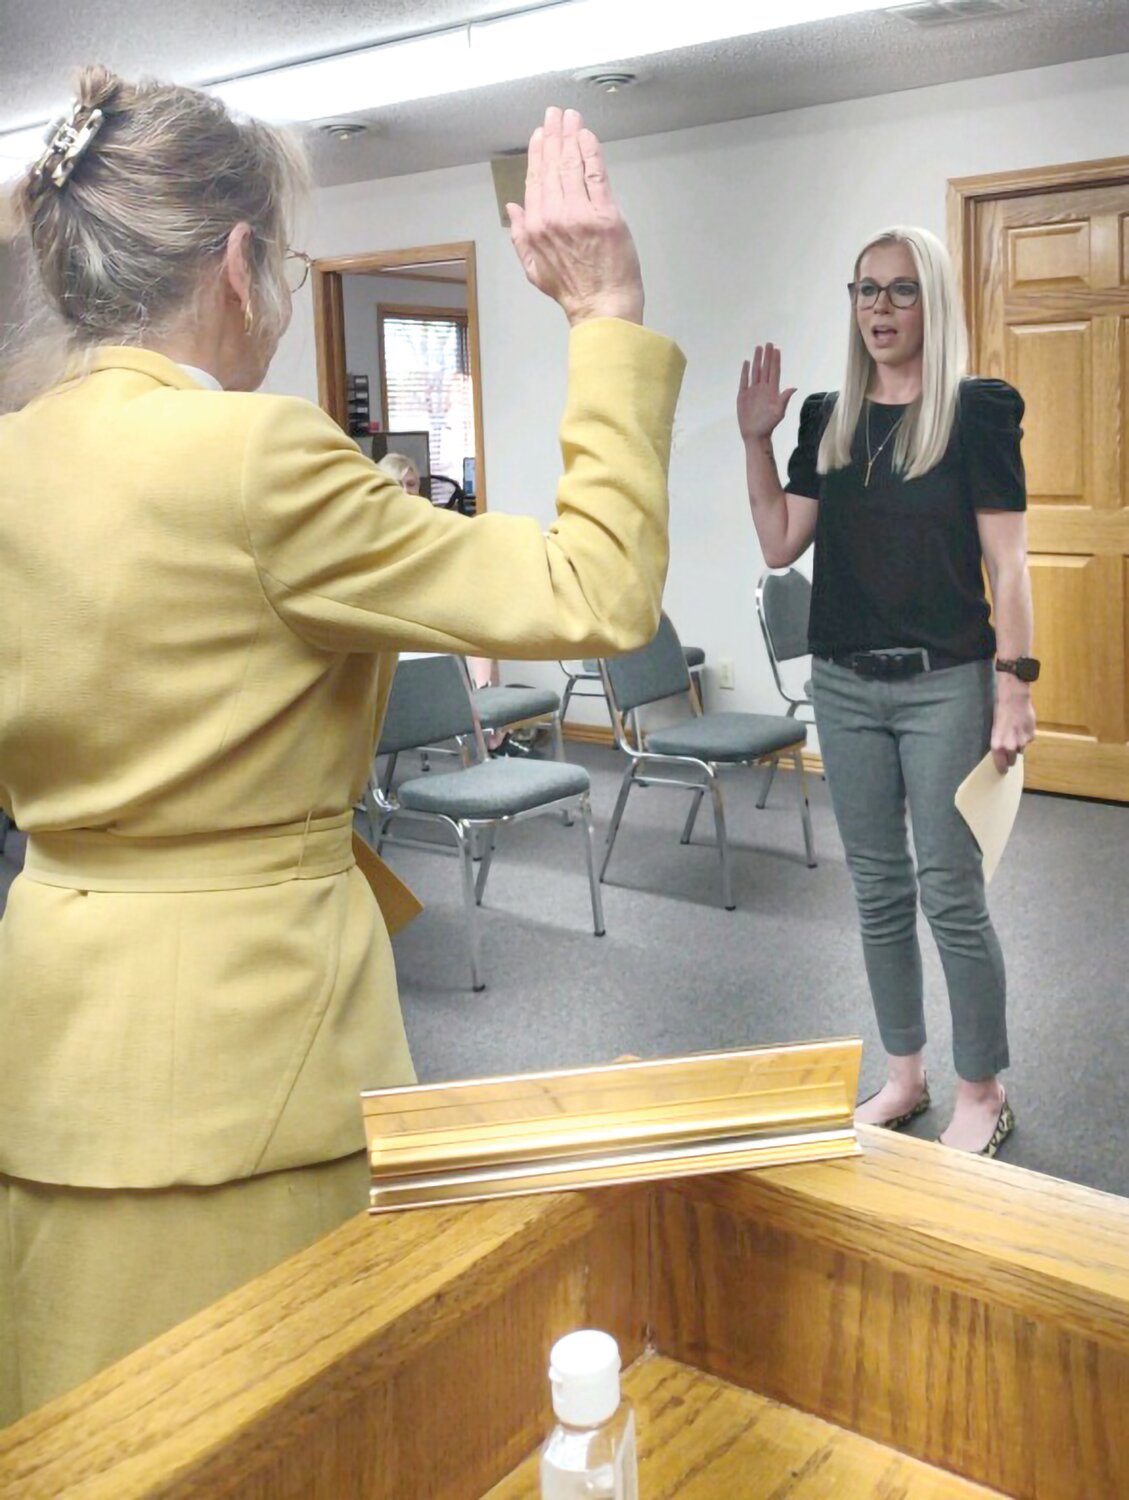 Conley issues the oath of office to newly elected mayor Amanda Moody.